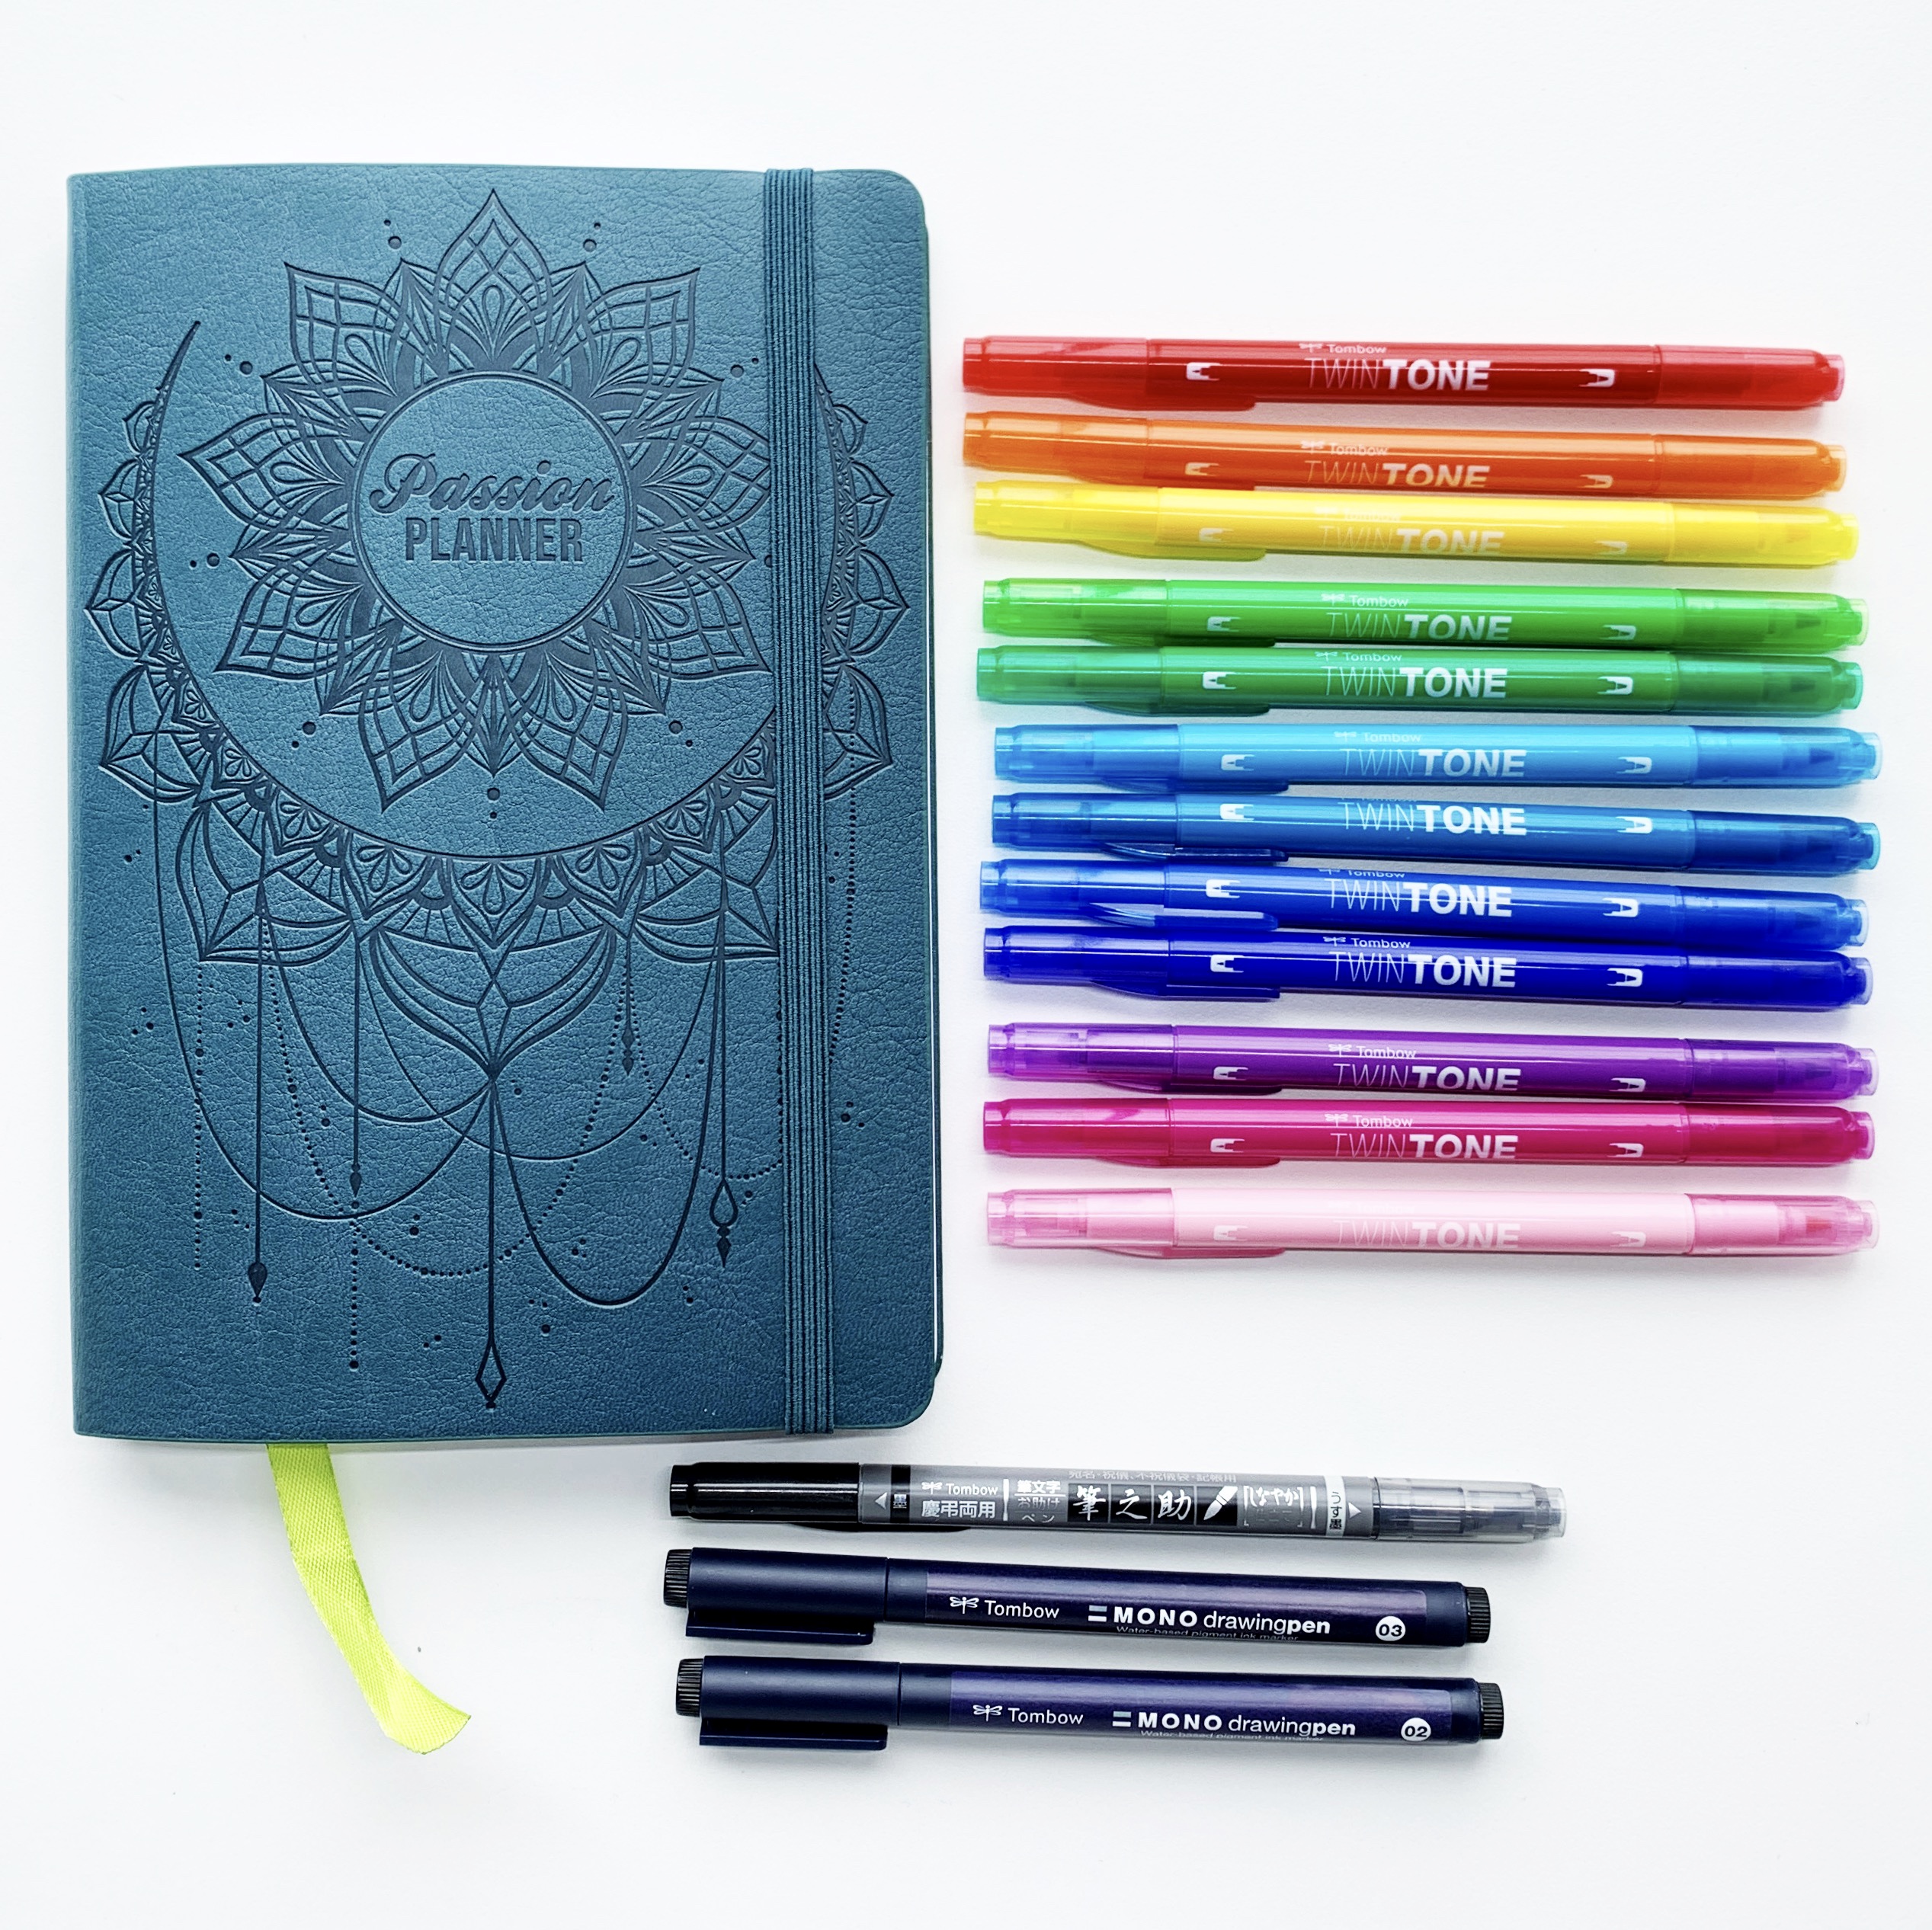 5 ways to personalize your Passion Planner with Adrienne from @studio80design!